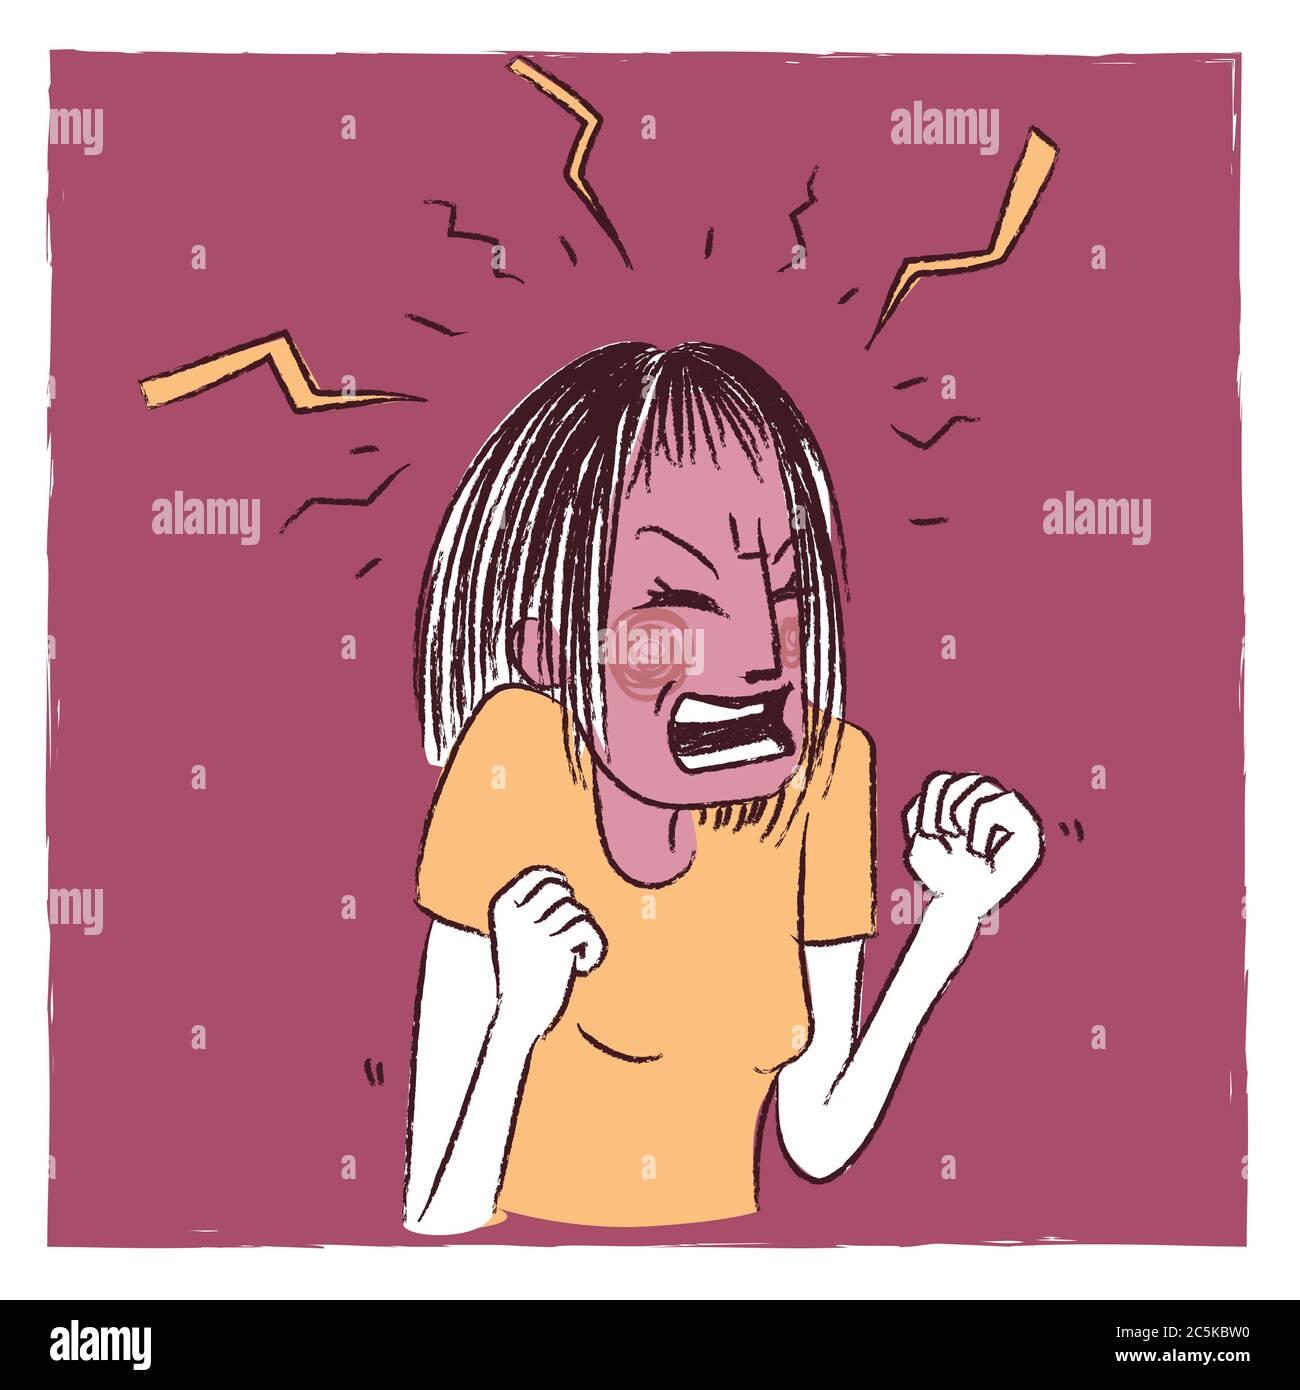 Illustration of an angry woman Stock Photo